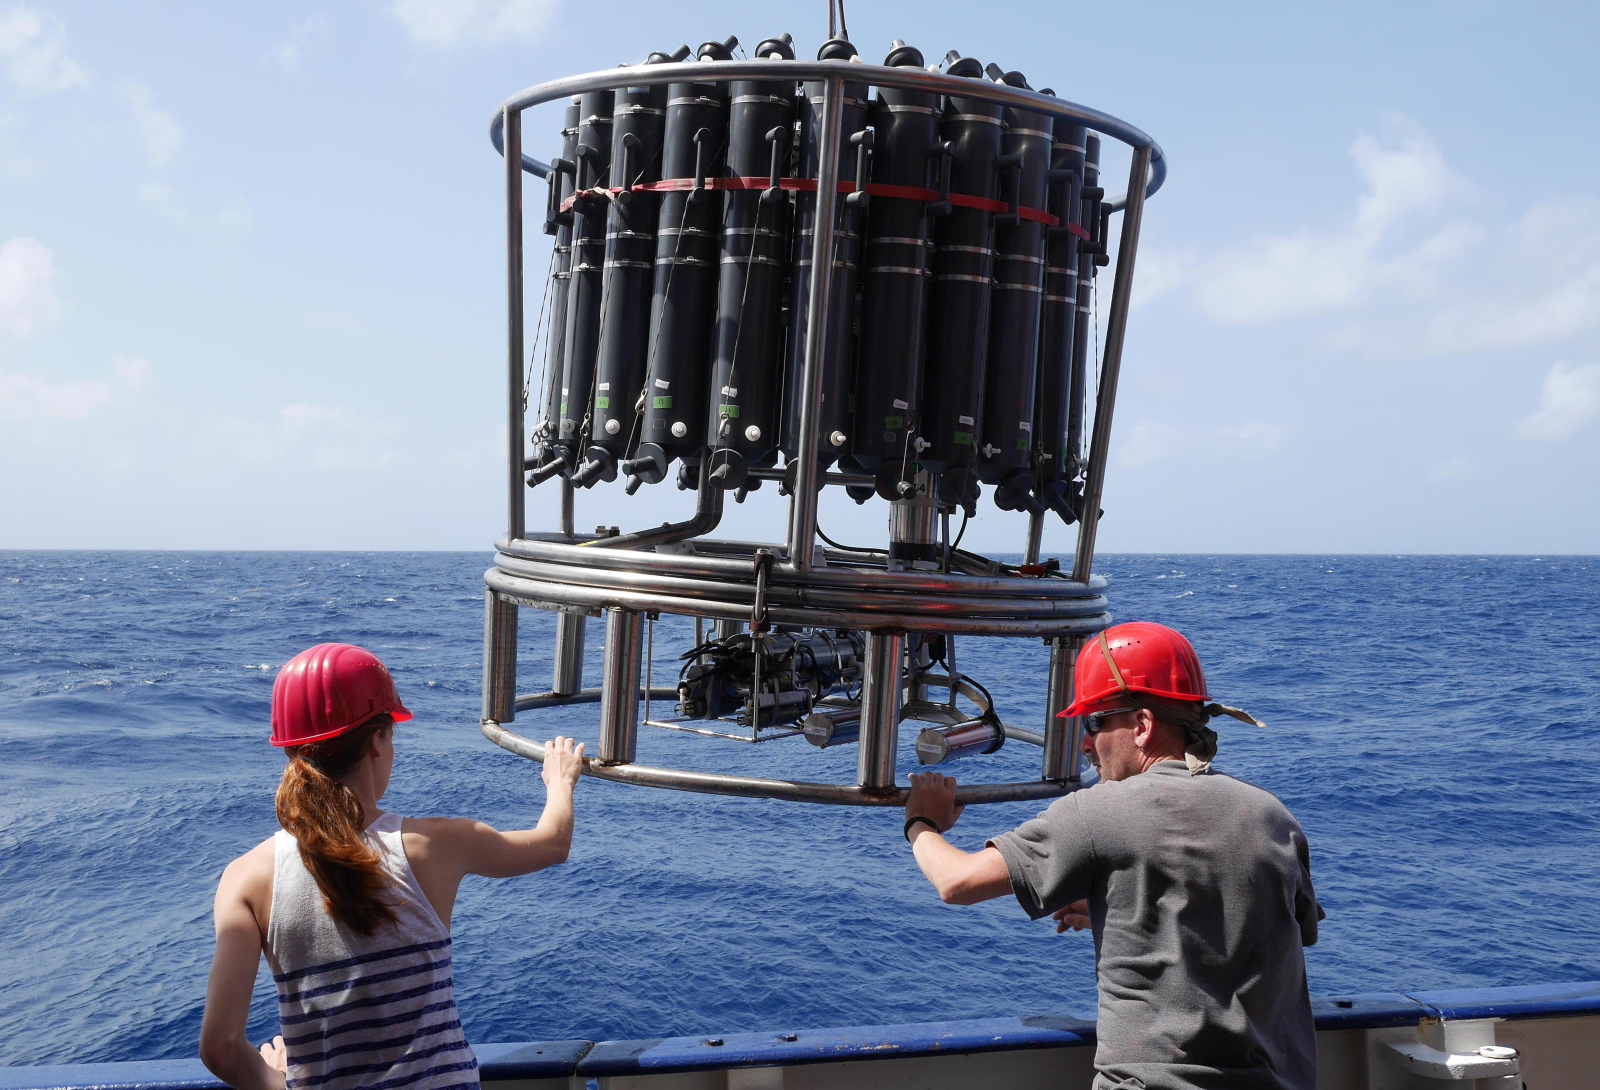 A woman in a tank top and a man in a tee-shirt wear red hard hats and hold on to a metal structure with tanks over the ocean.